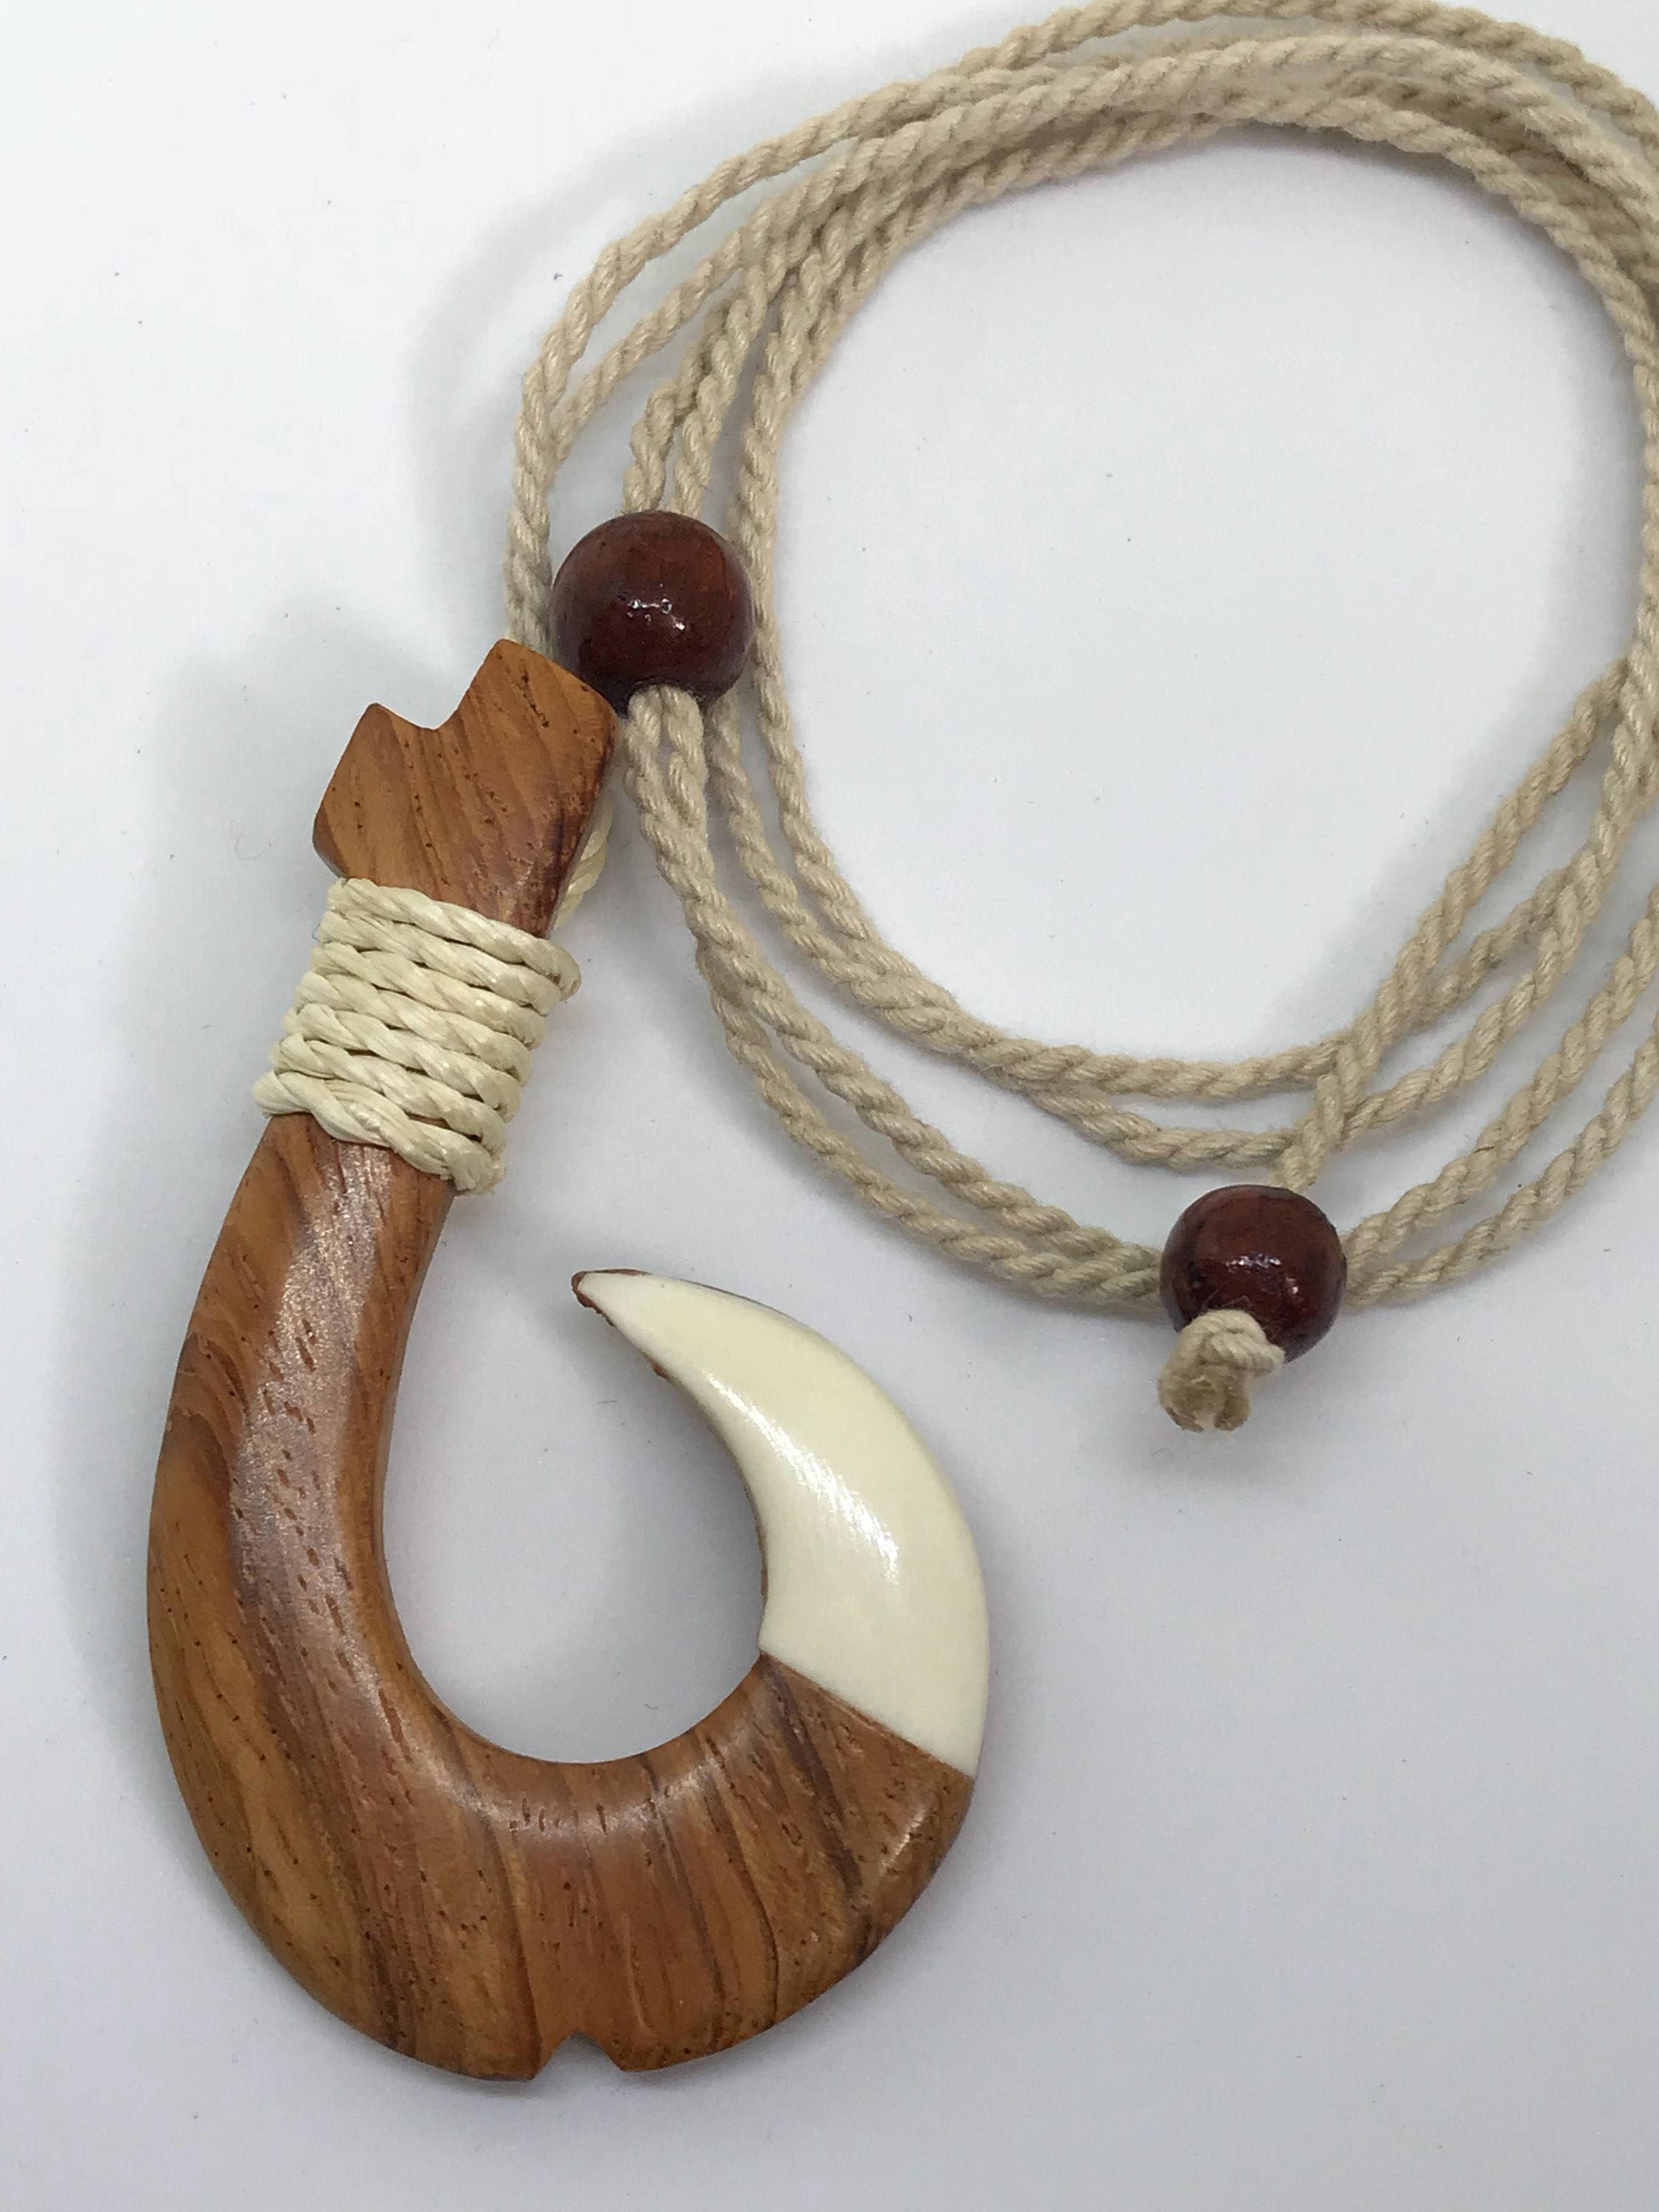 KanaKala Pacific Hawaiian Hand Carved Bone Fish Hook Necklace for Men. Our  Zac Brown Band Inspired Replica. Black Cord., Adjustable, Bone